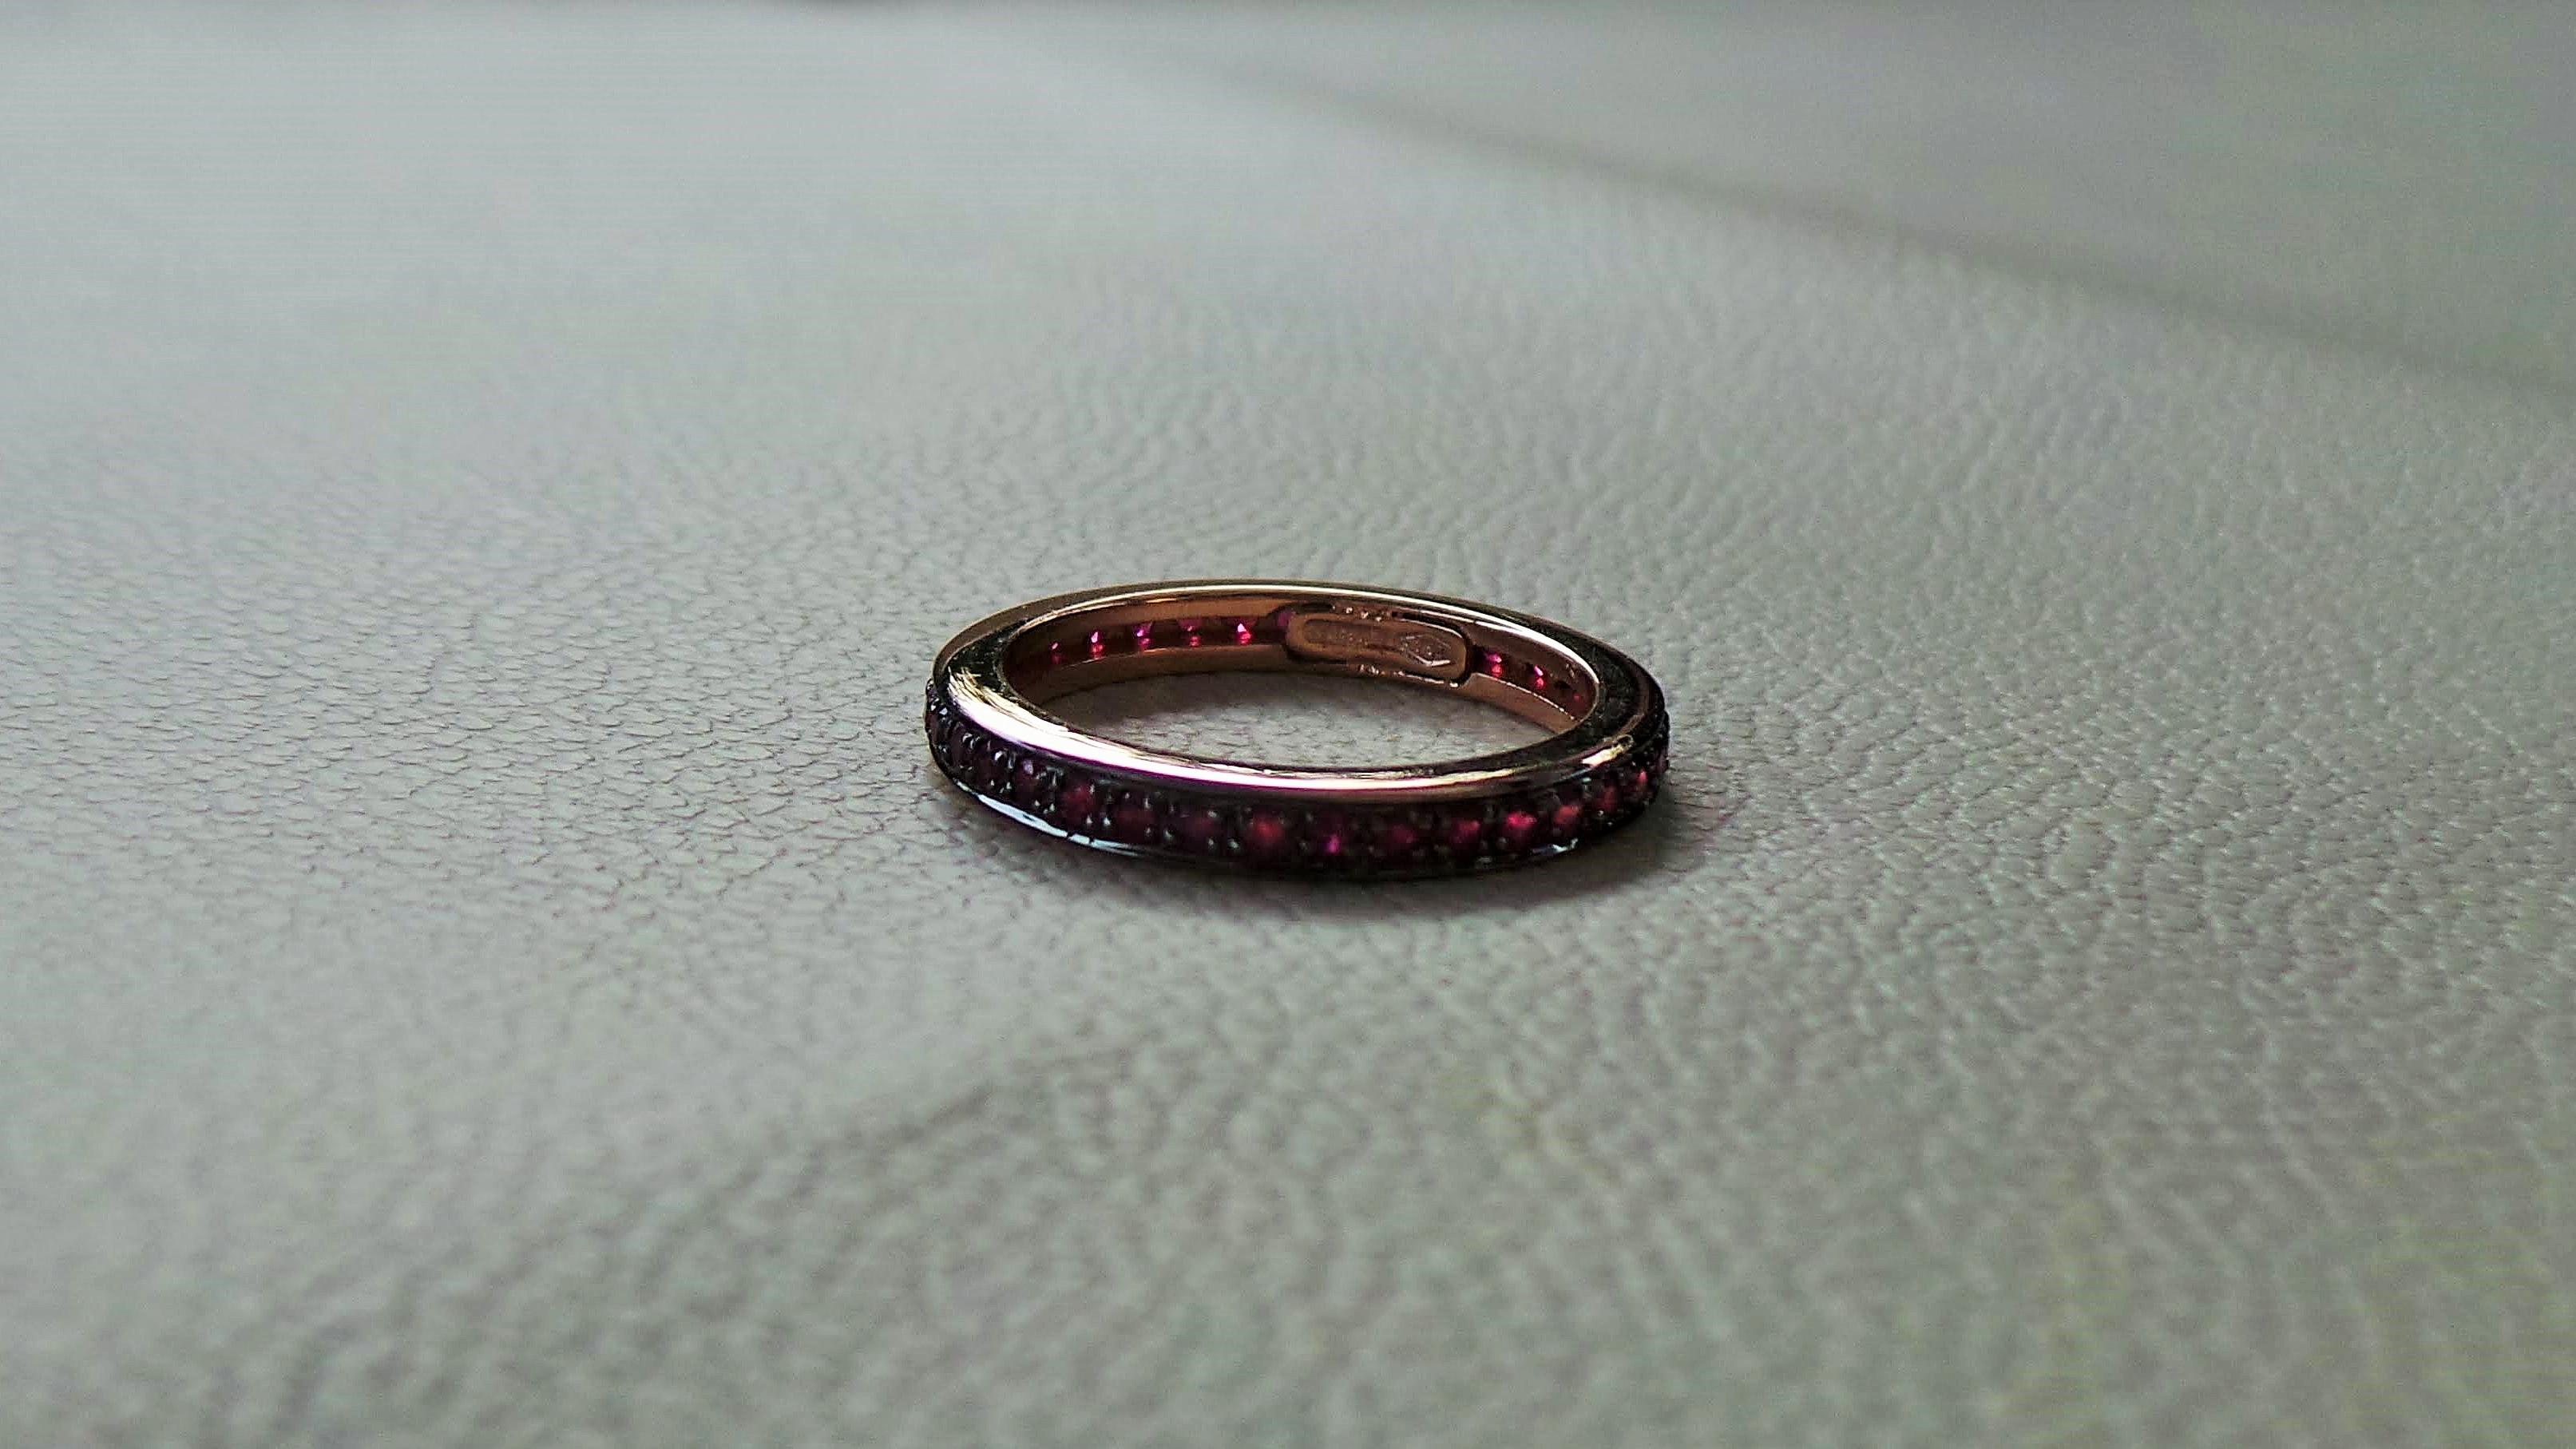 Andrea Macinai design a dedicated collection for stackable rings.  
The eternity ring has rubies all the way around the band.
Round rubies cut brillant total 0.70 carats.
We're a workshop so every piece is handmade, customizable and resizable. Feel